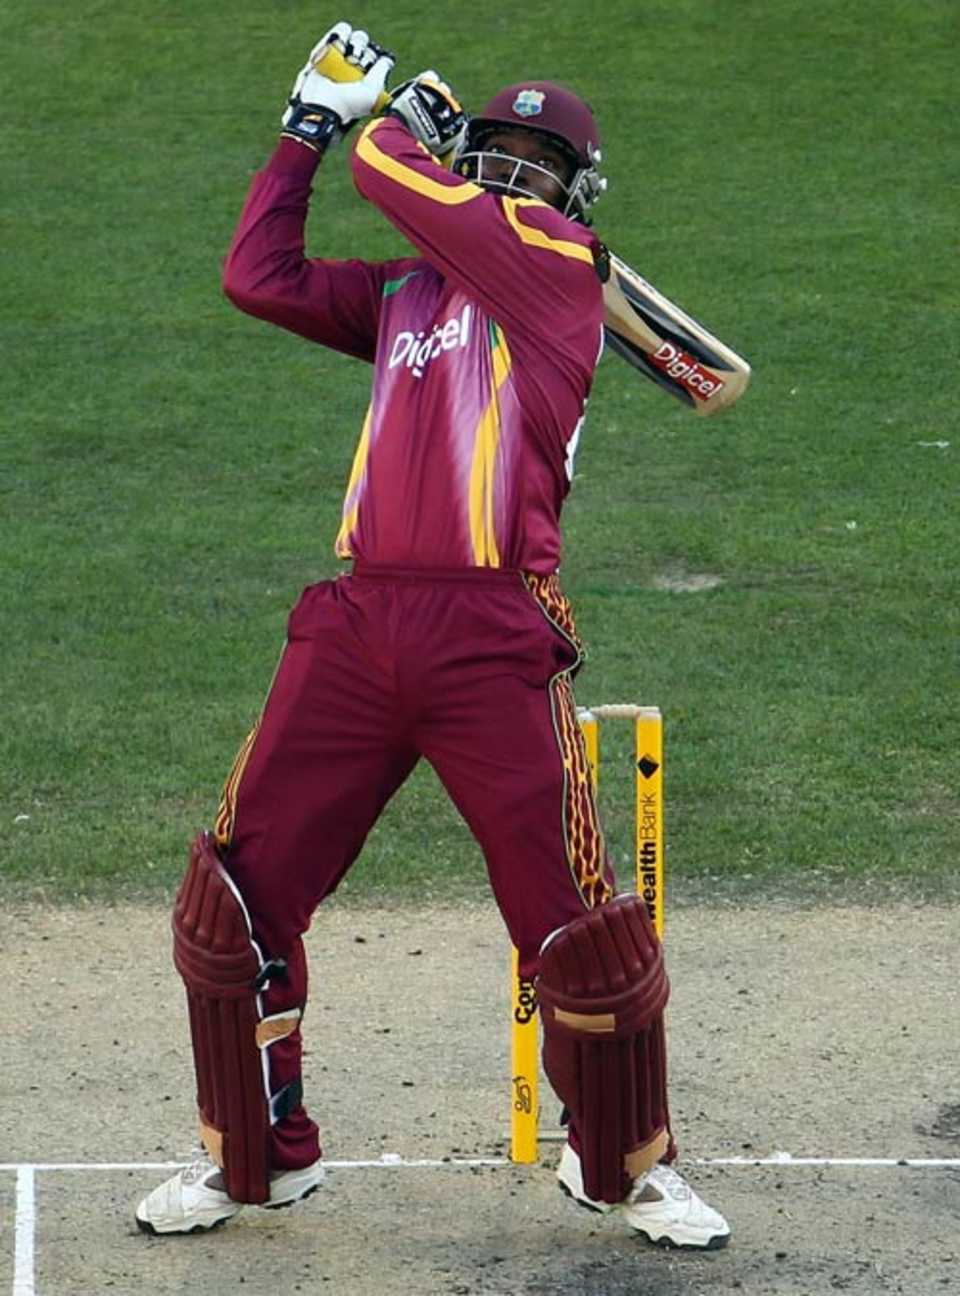 Chris Gayle skies an attempted pull